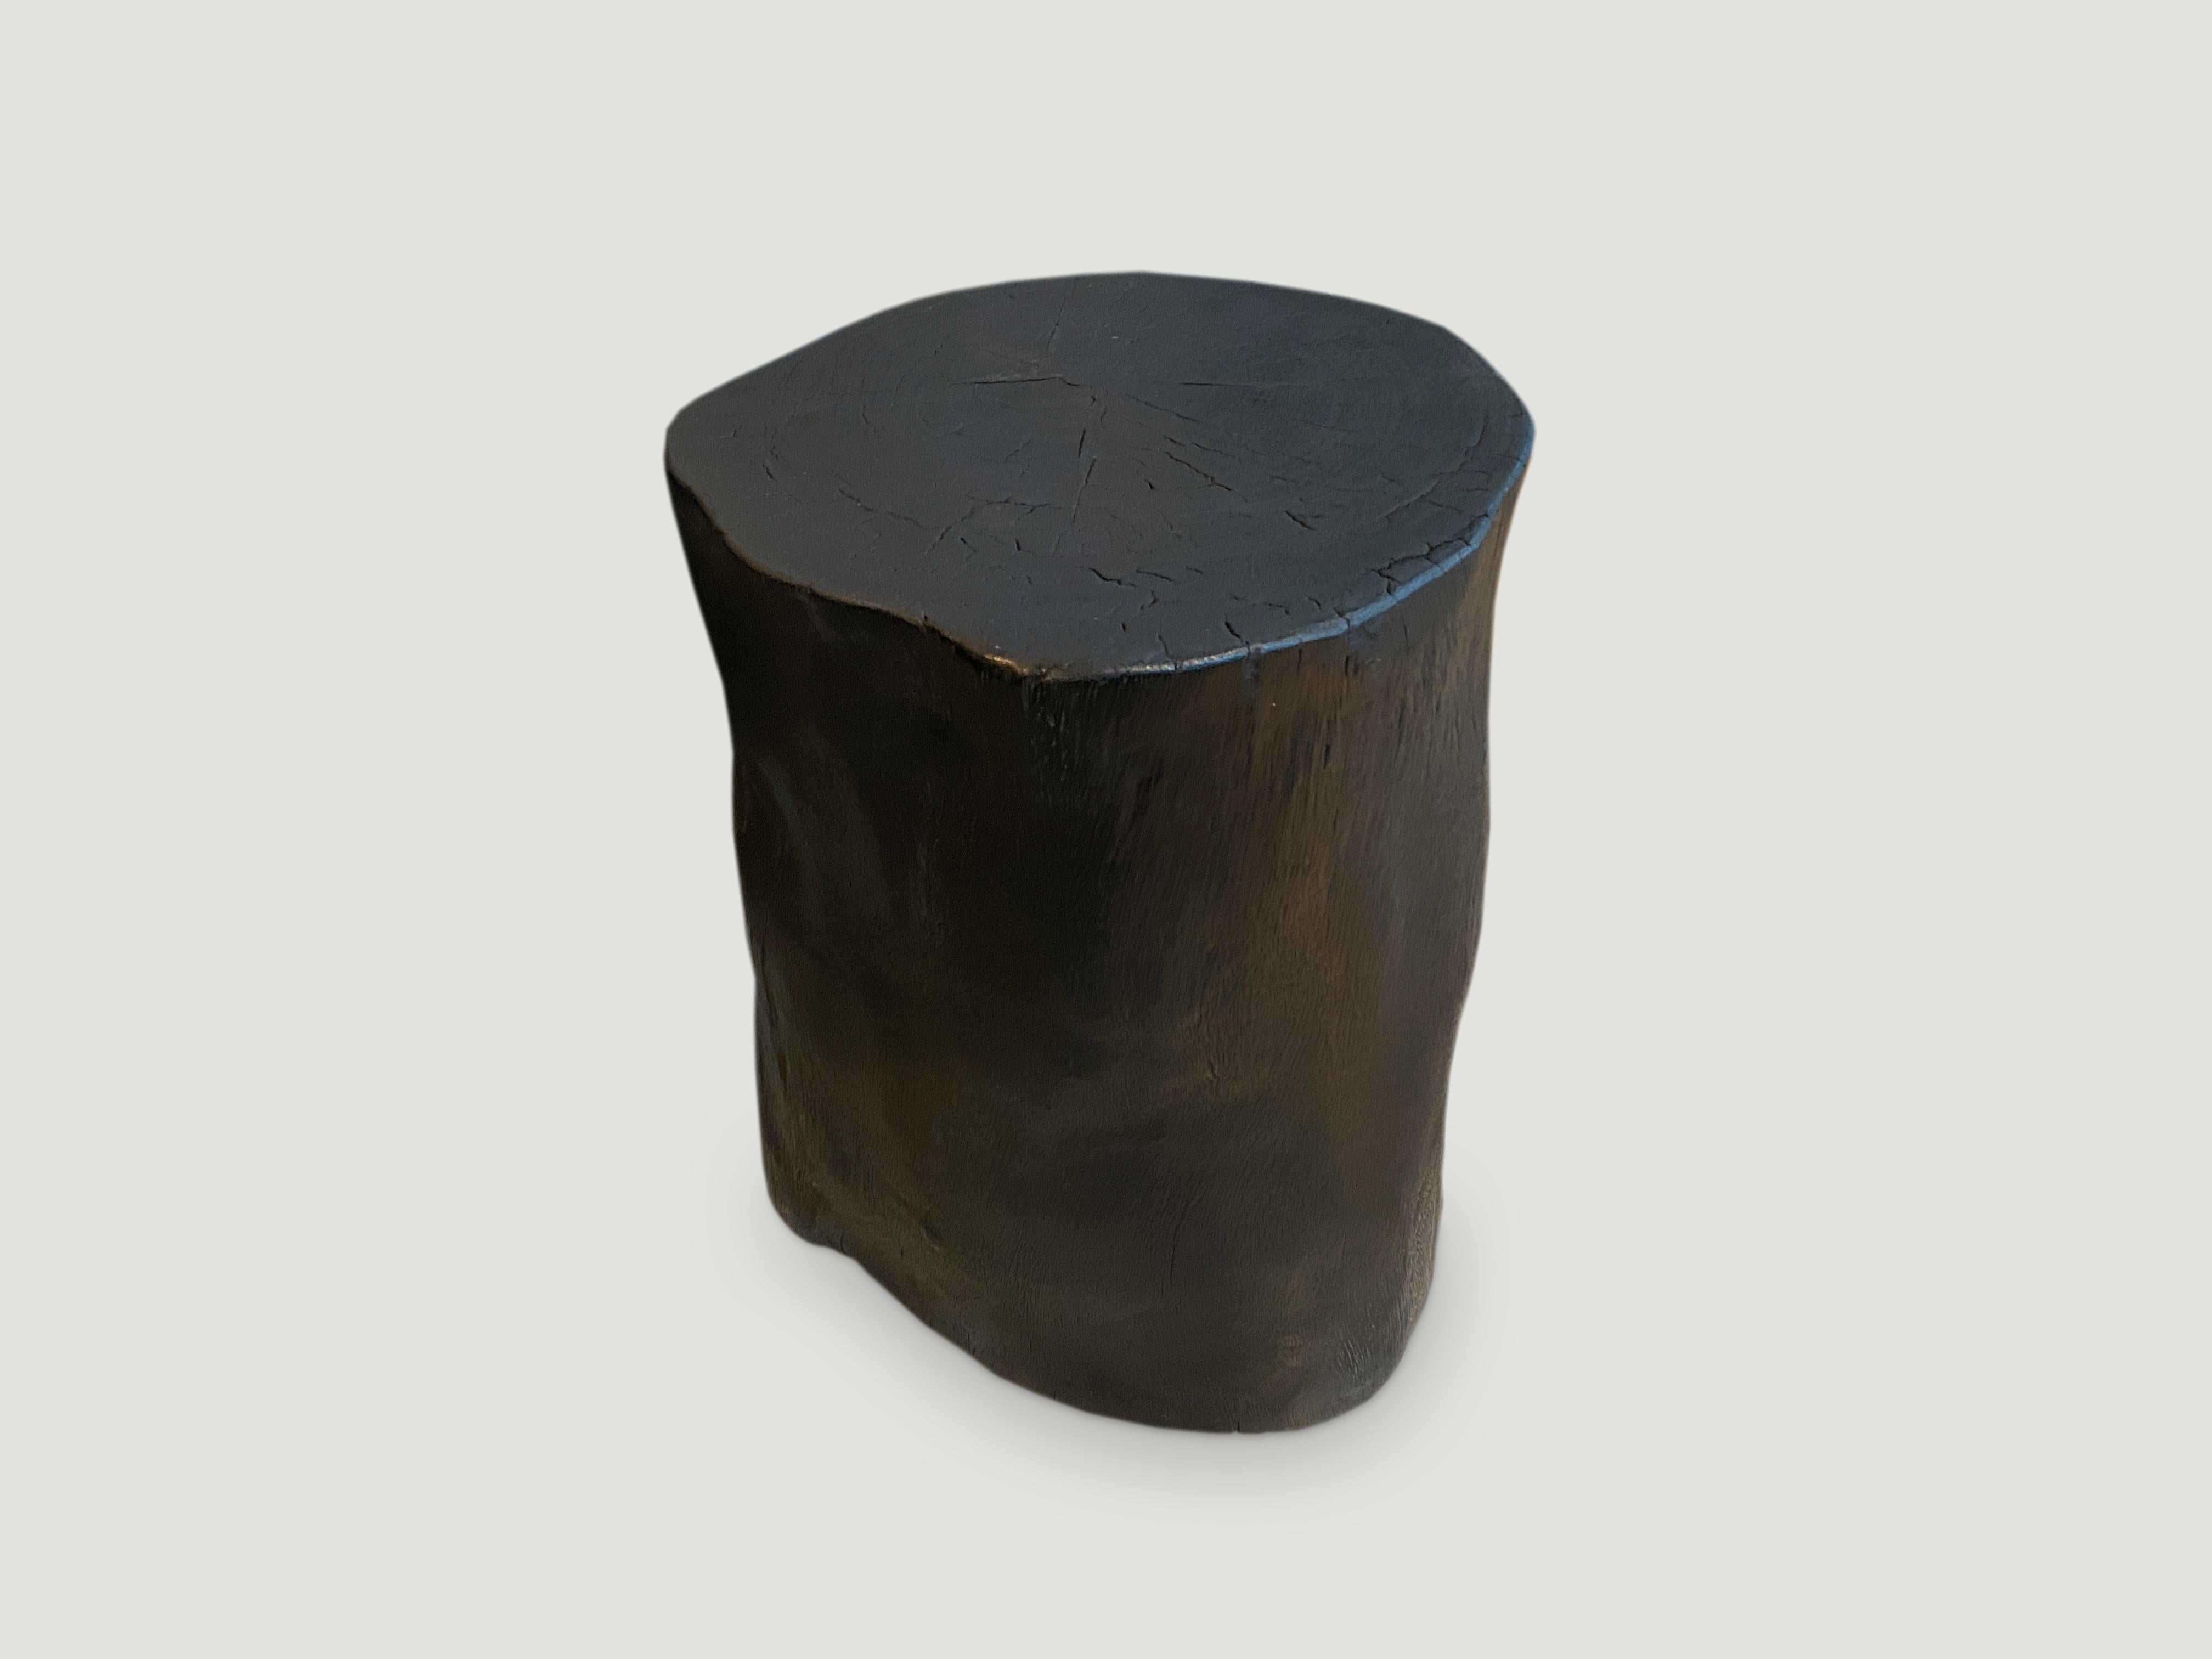 Minimalist hand carved solid reclaimed suar wood side table. Burnt, sanded and sealed whilst respecting the natural organic shape. We have a collection. All unique. The price and size reflects the one shown.

The Triple Burnt collection represents